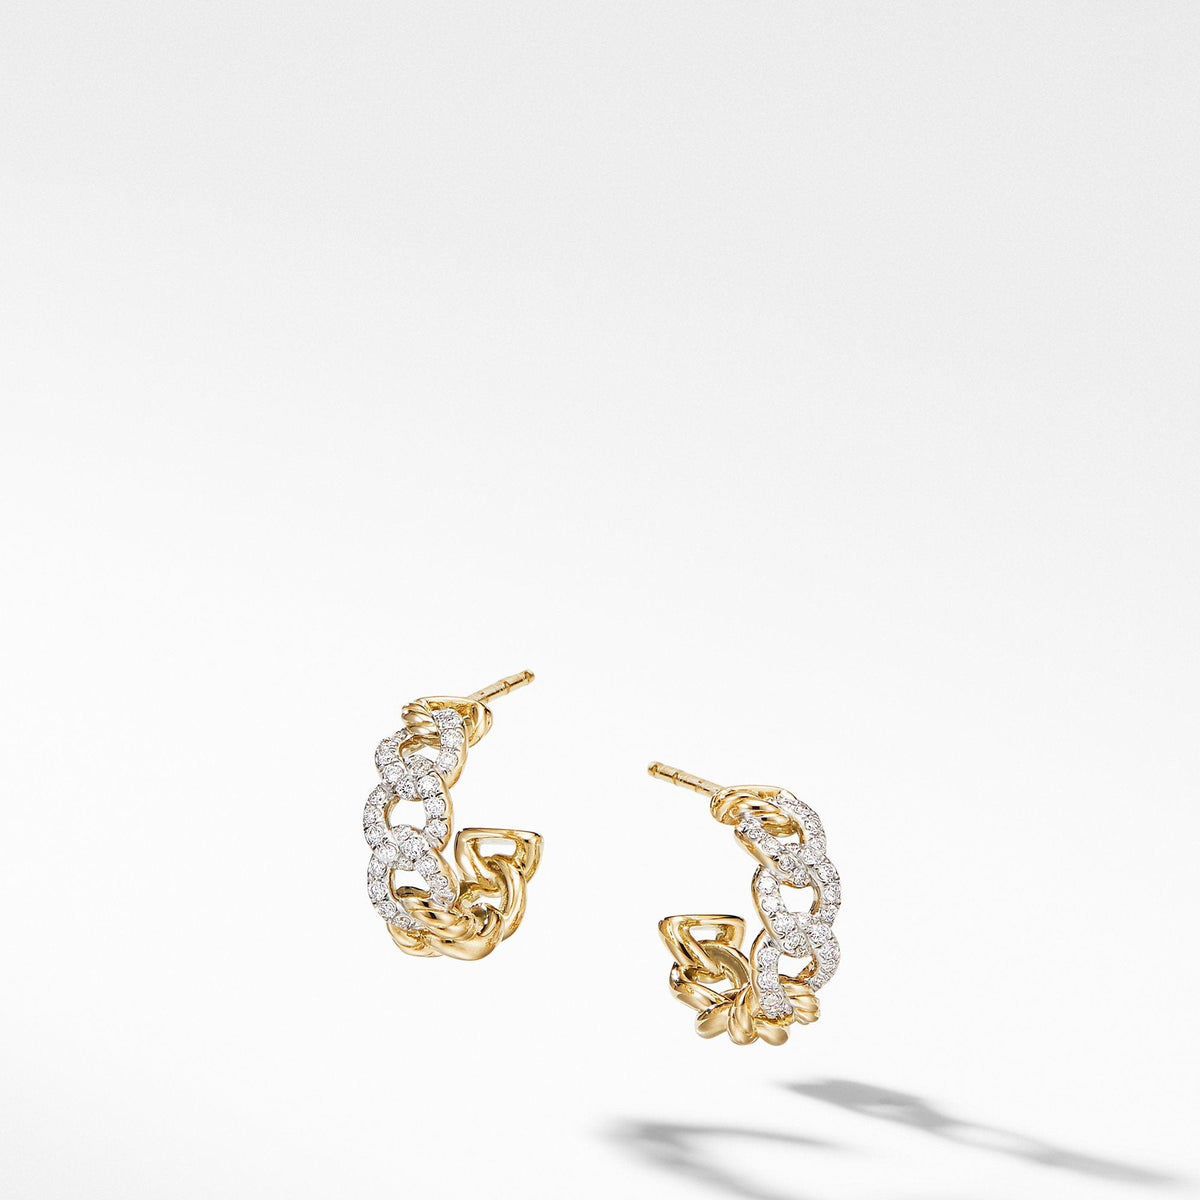 Belmont Curb Link Small Hoop Earrings in 18K Yellow Gold with Pavé Diamonds